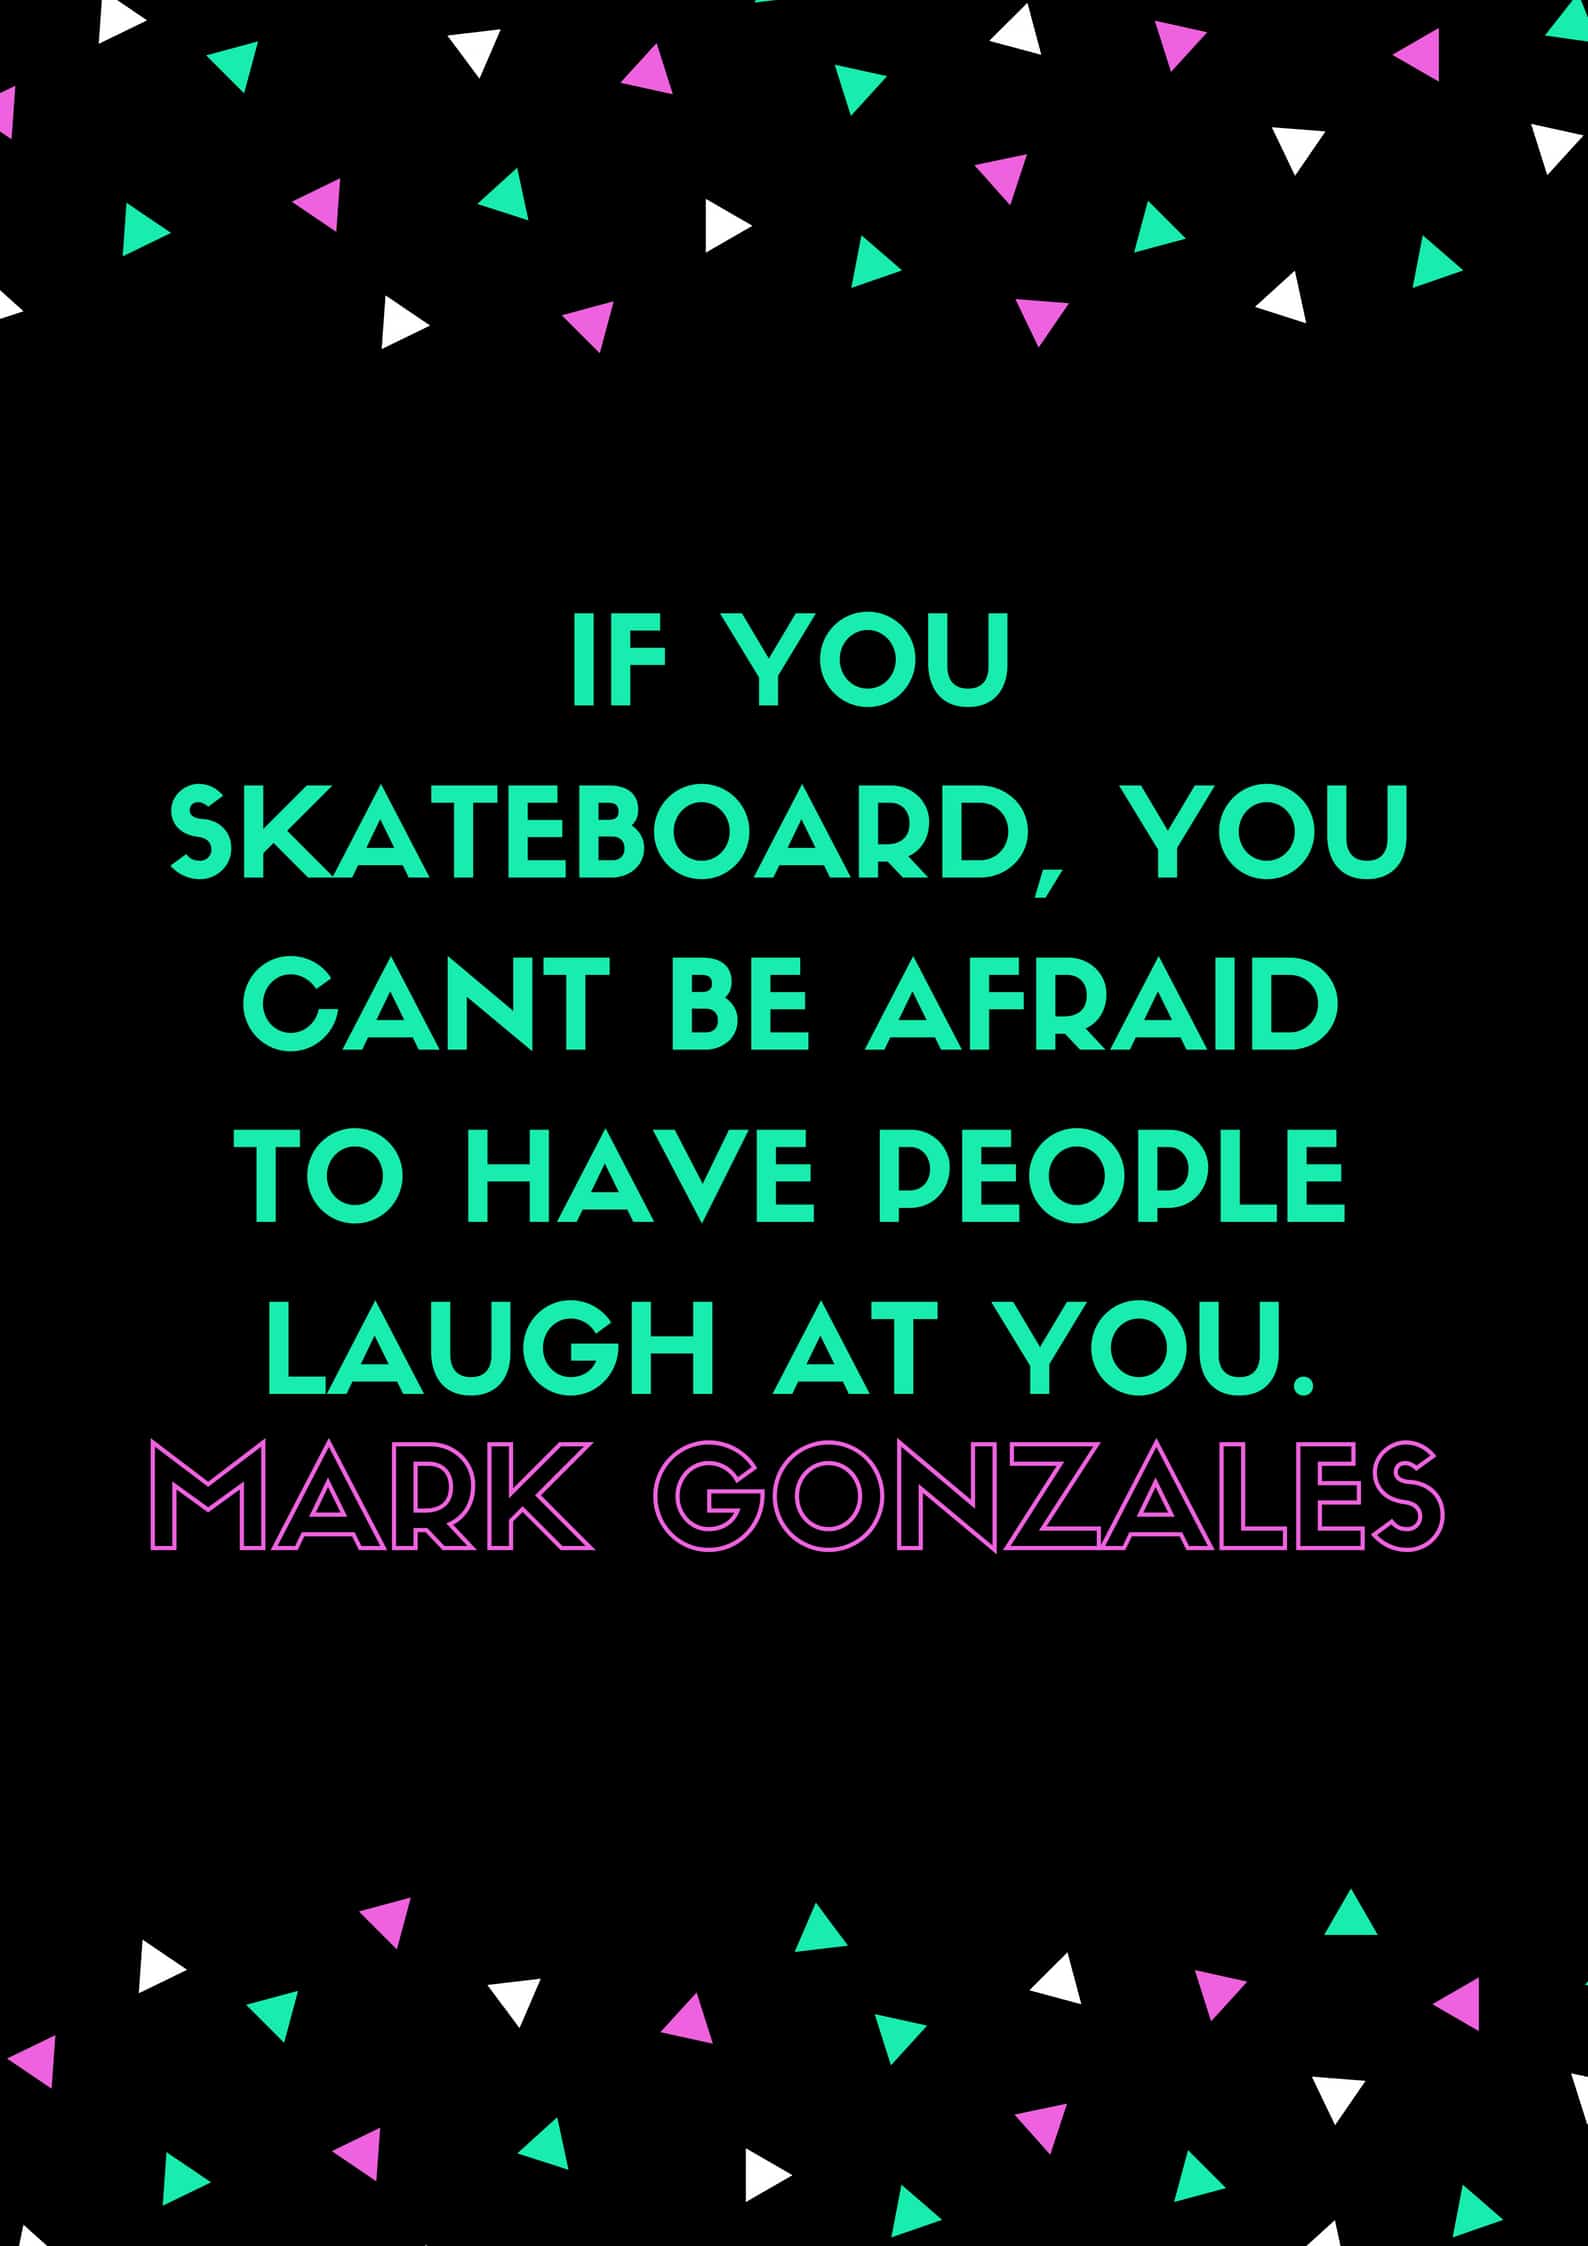 IF YOU SKATEBOARD, YOU CANT BE AFRAID TO HAVE PEOPLE LAUGH AT YOU.